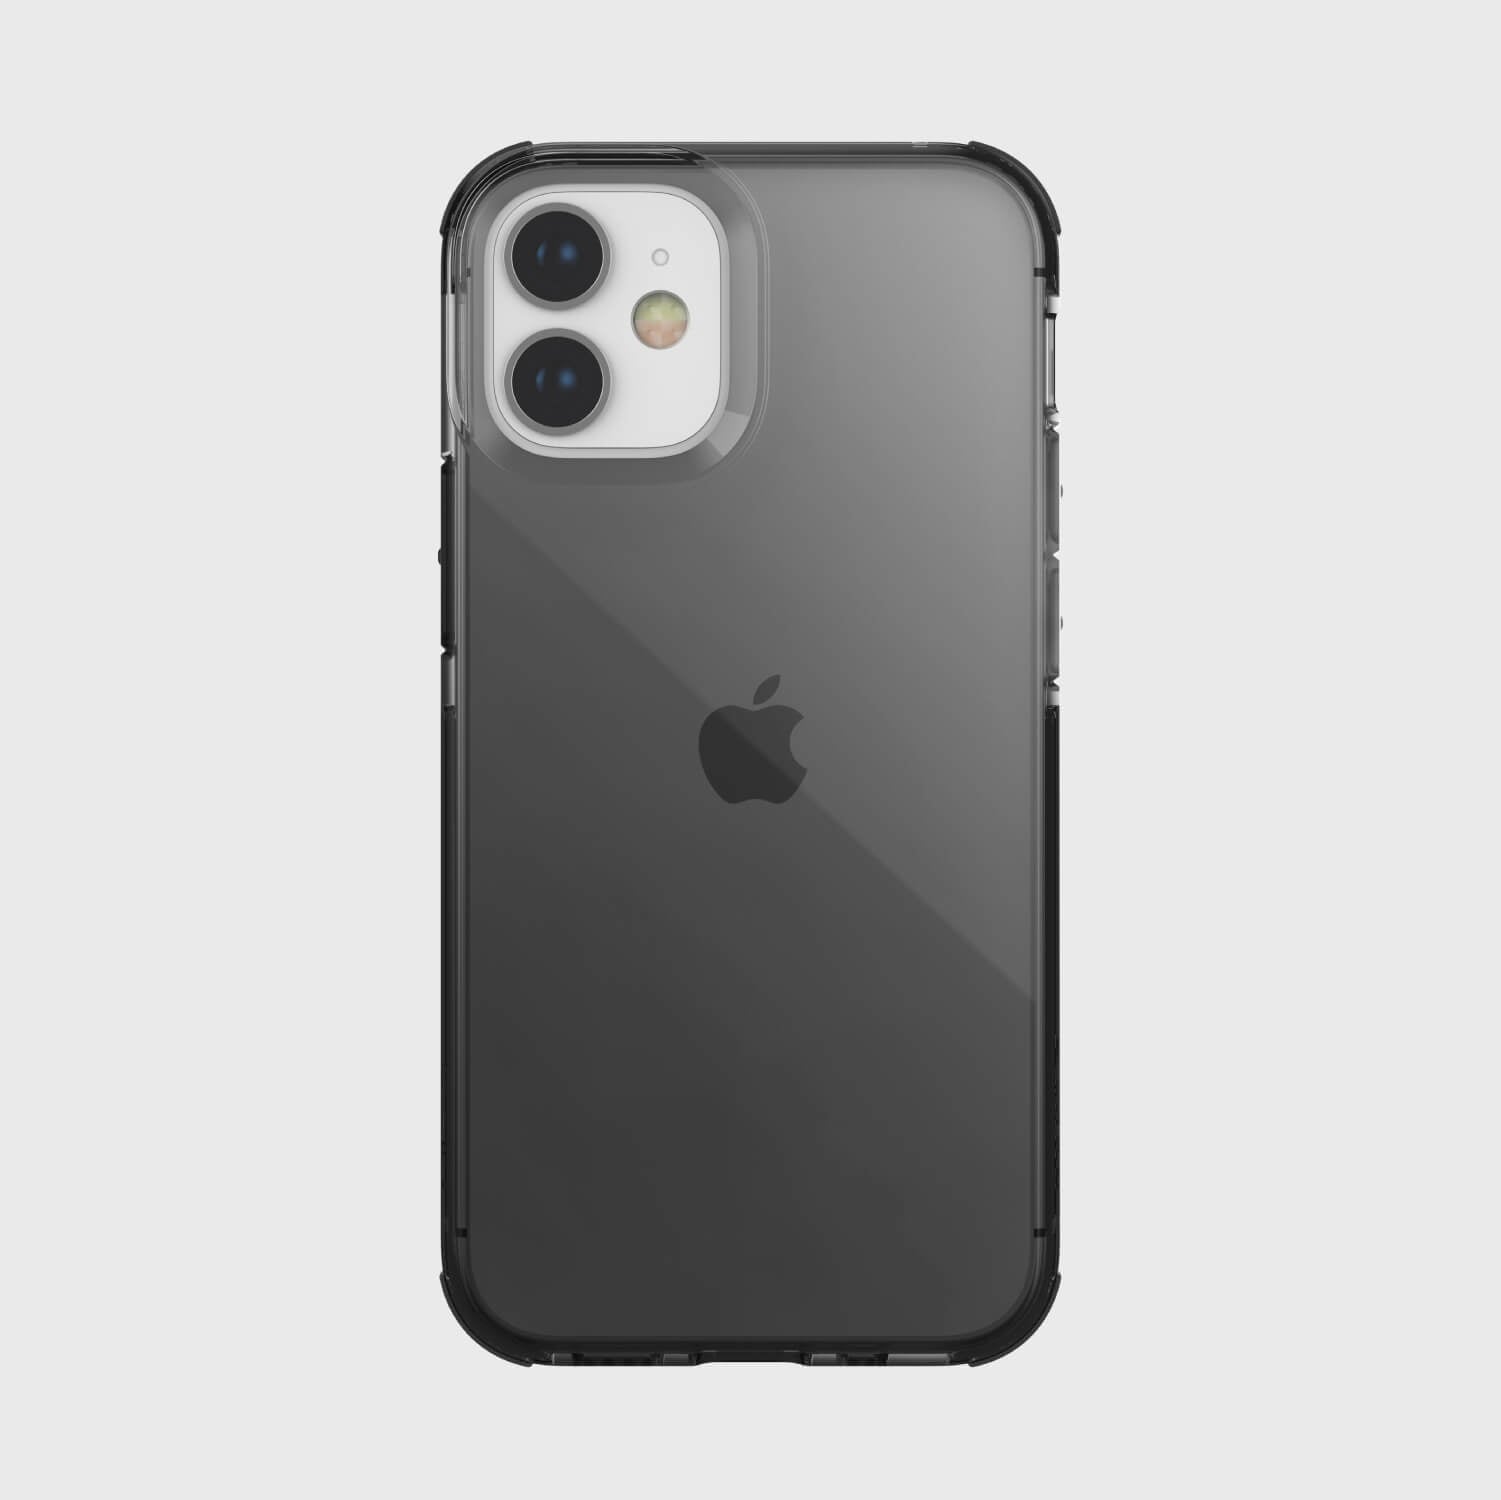 The back view of a Raptic Clear iPhone 12 & iPhone 12 Pro Case - CLEAR in black.